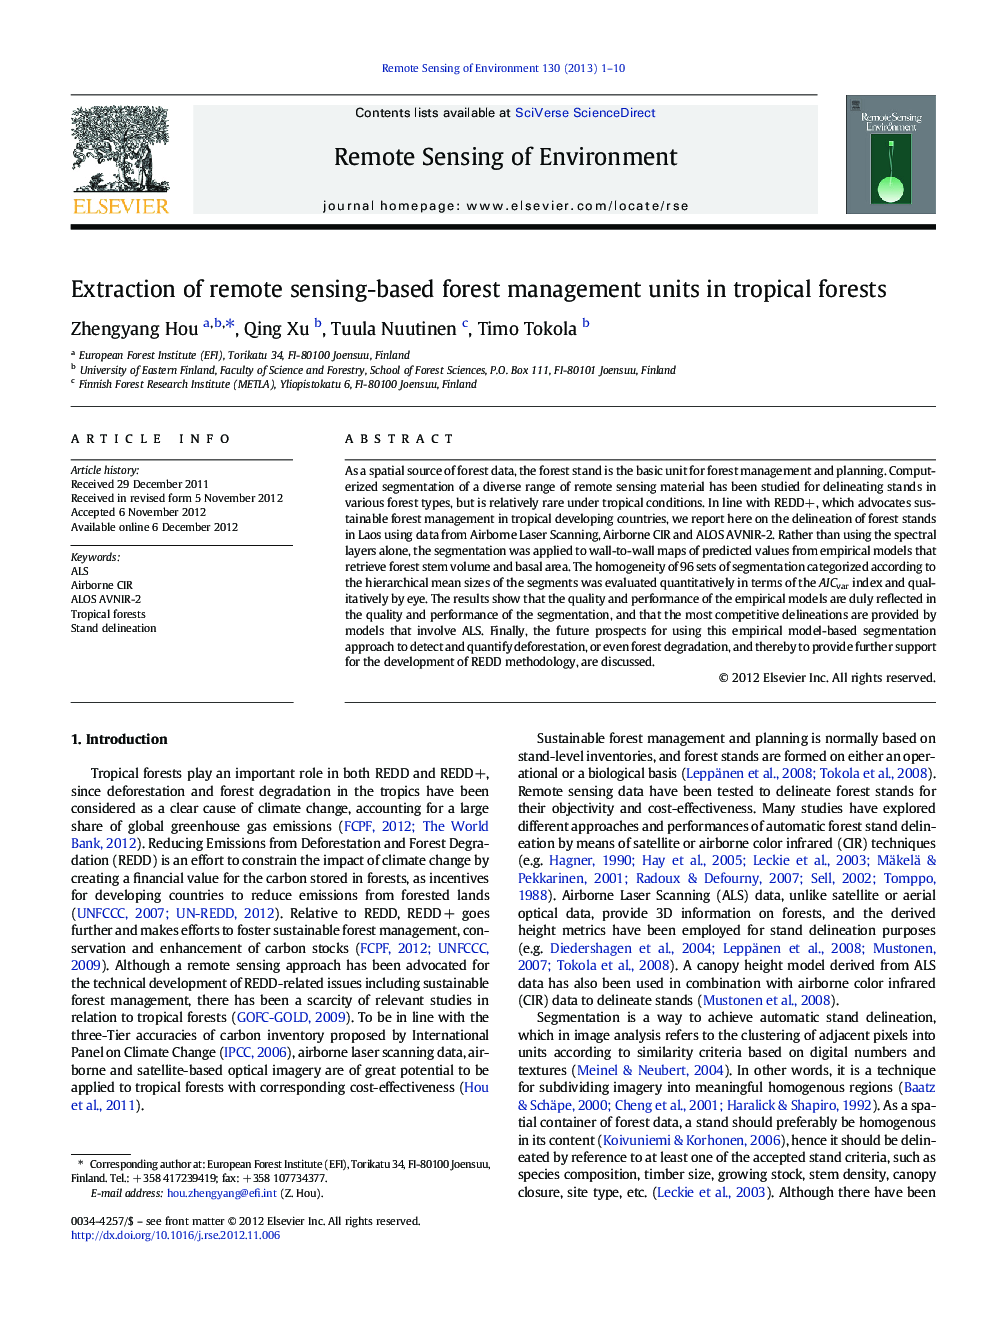 Extraction of remote sensing-based forest management units in tropical forests